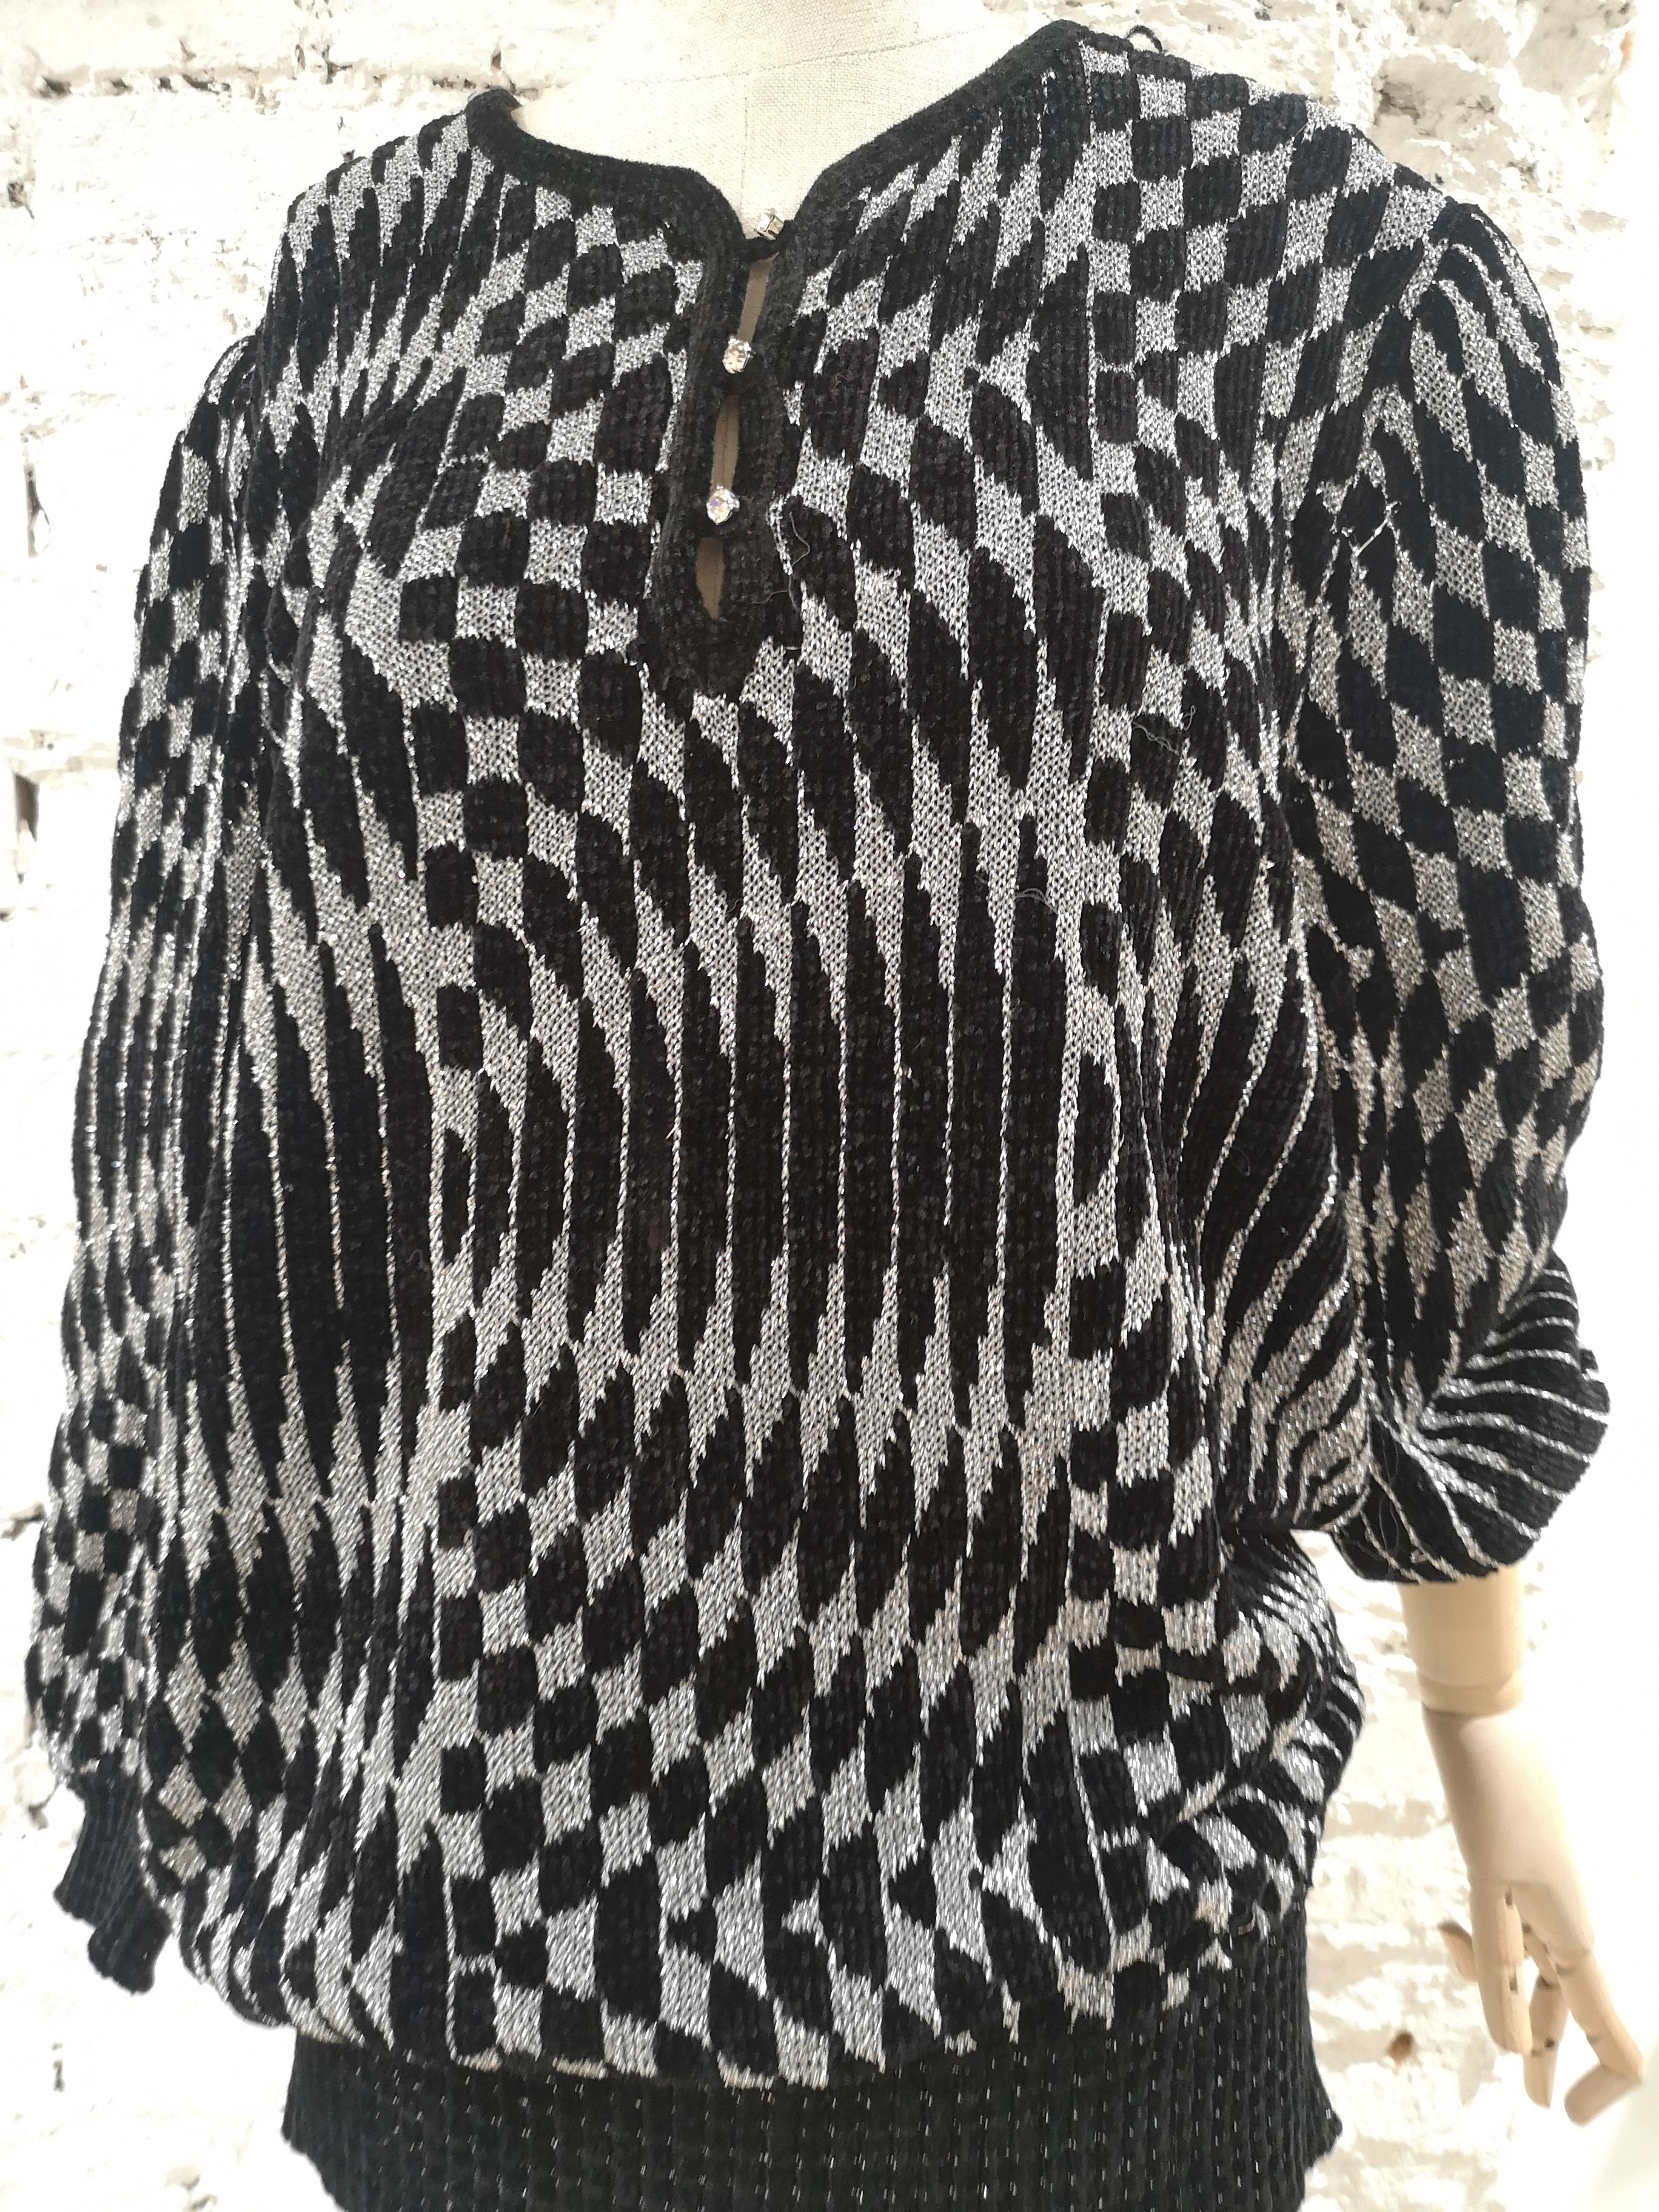 Lilly florence black and silver sweater
size L 